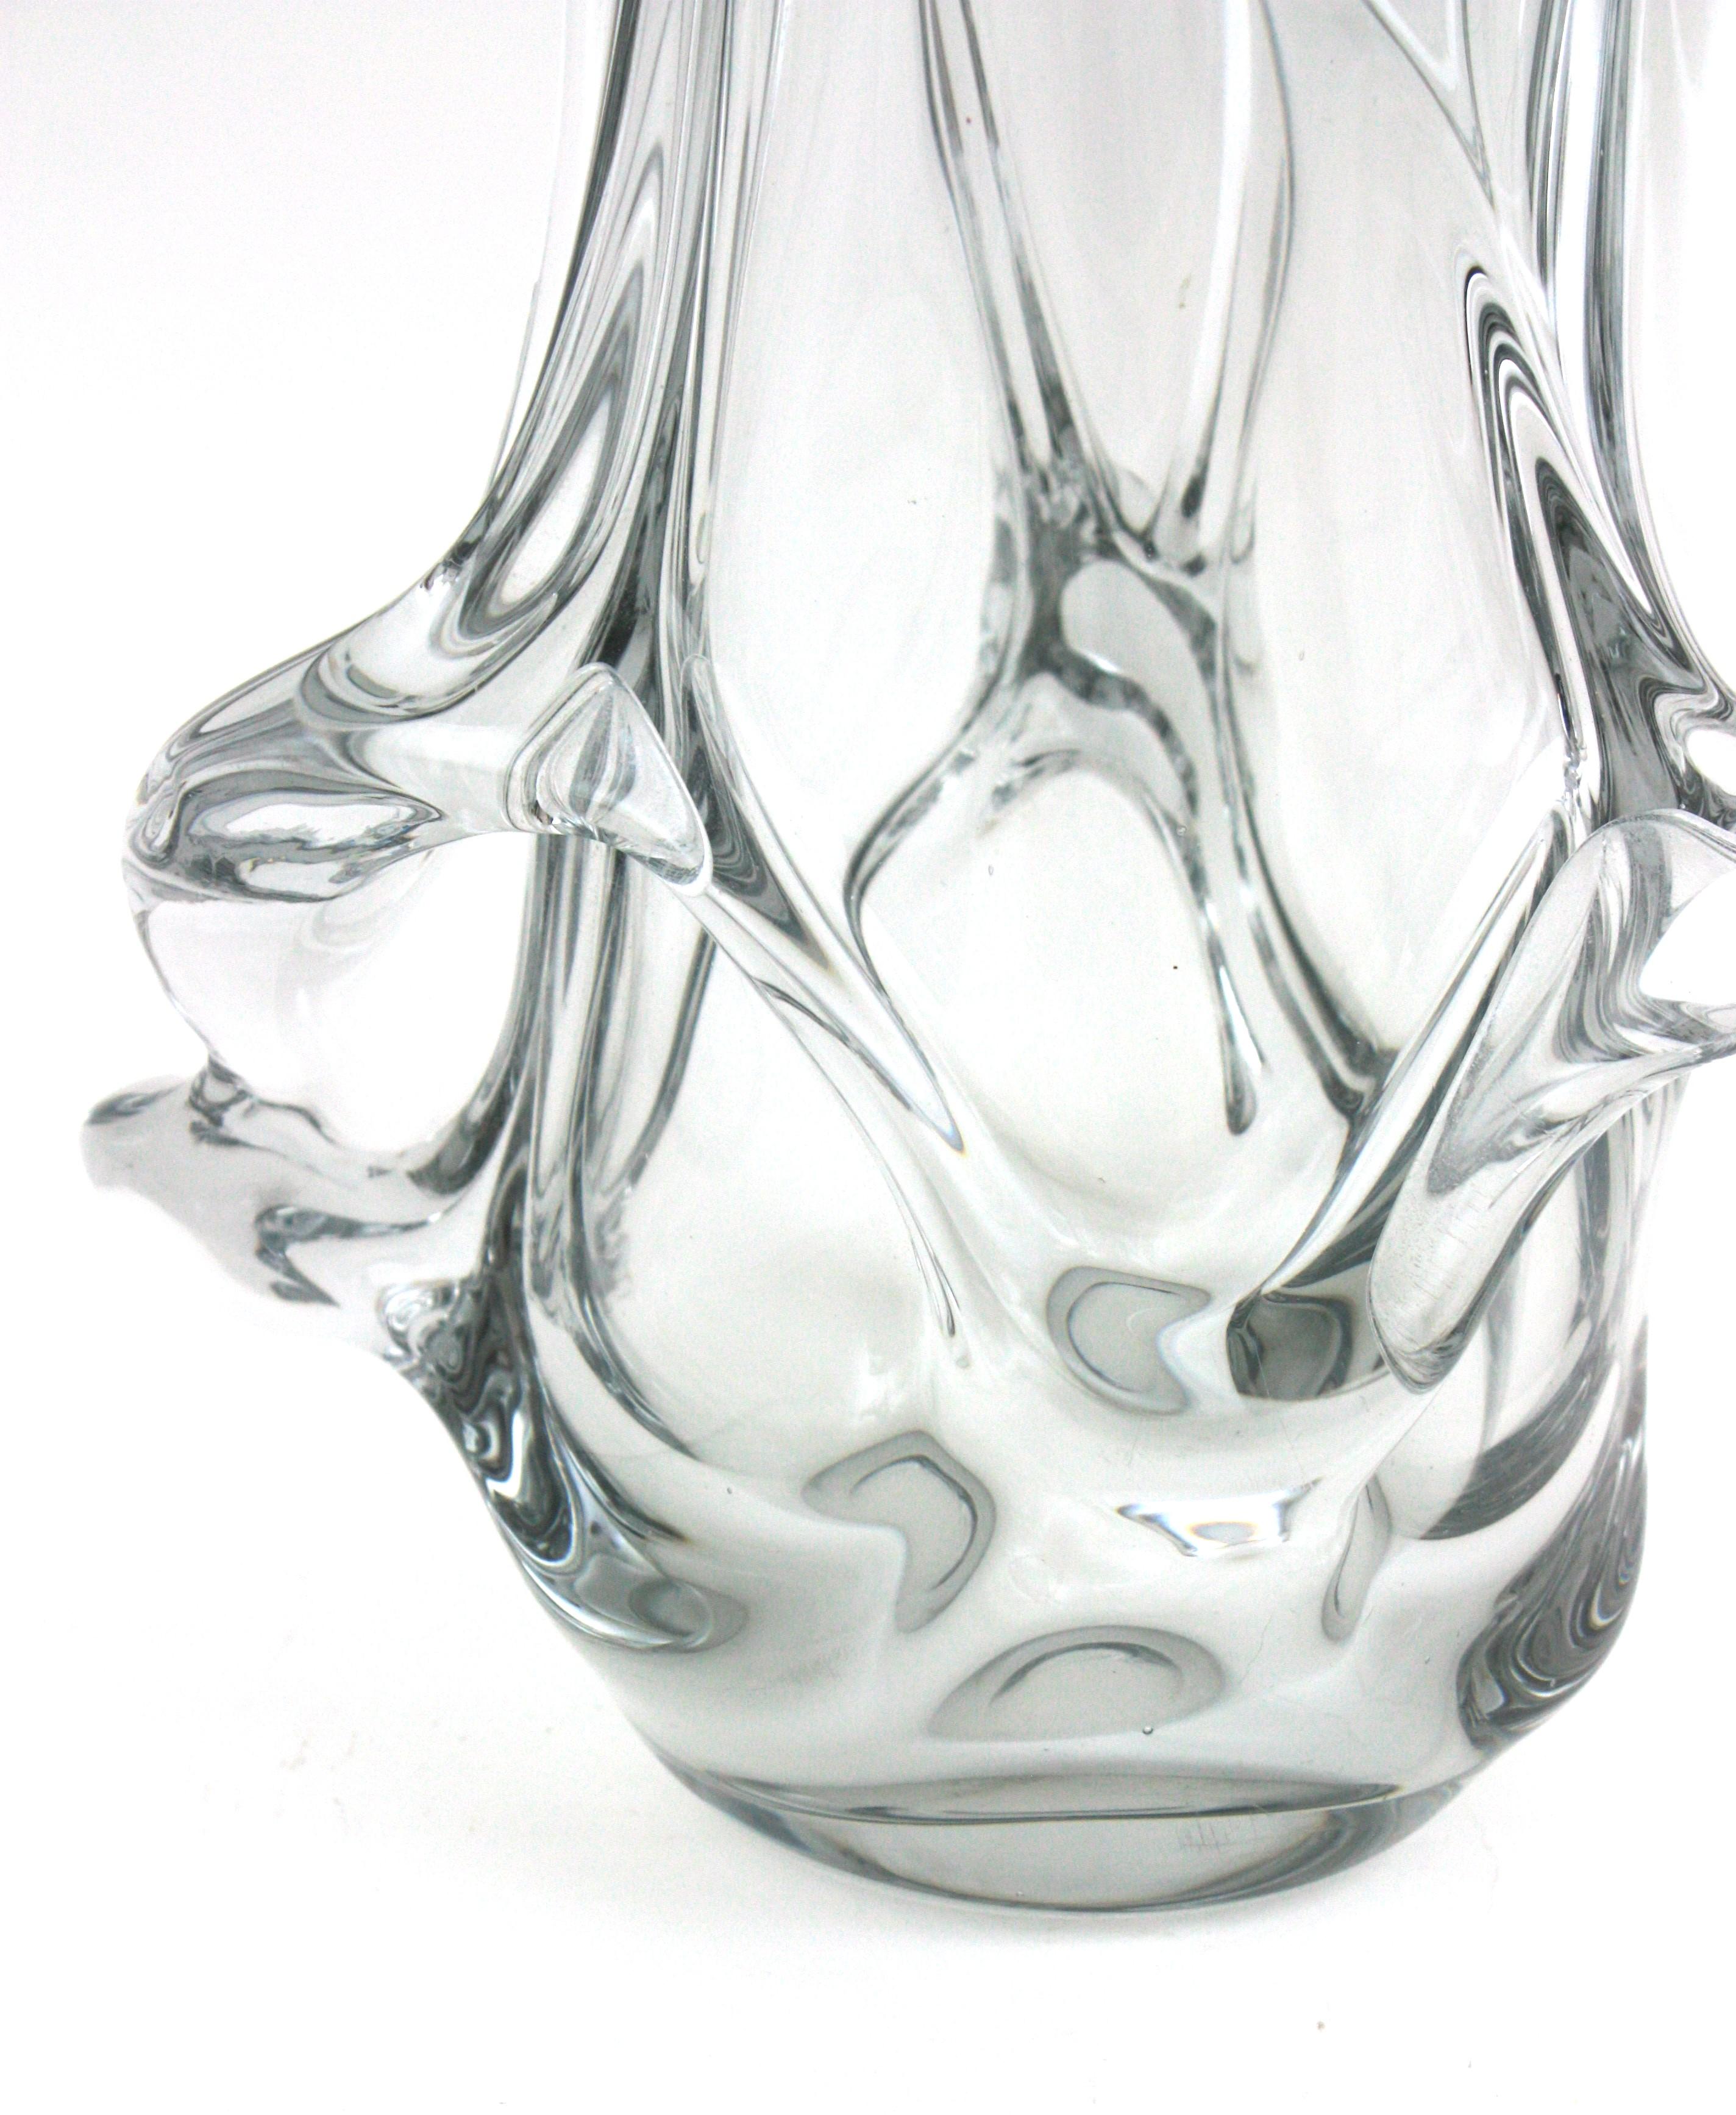 Large Murano Organic Shaped Vase in Clear Glass, 1950s For Sale 9